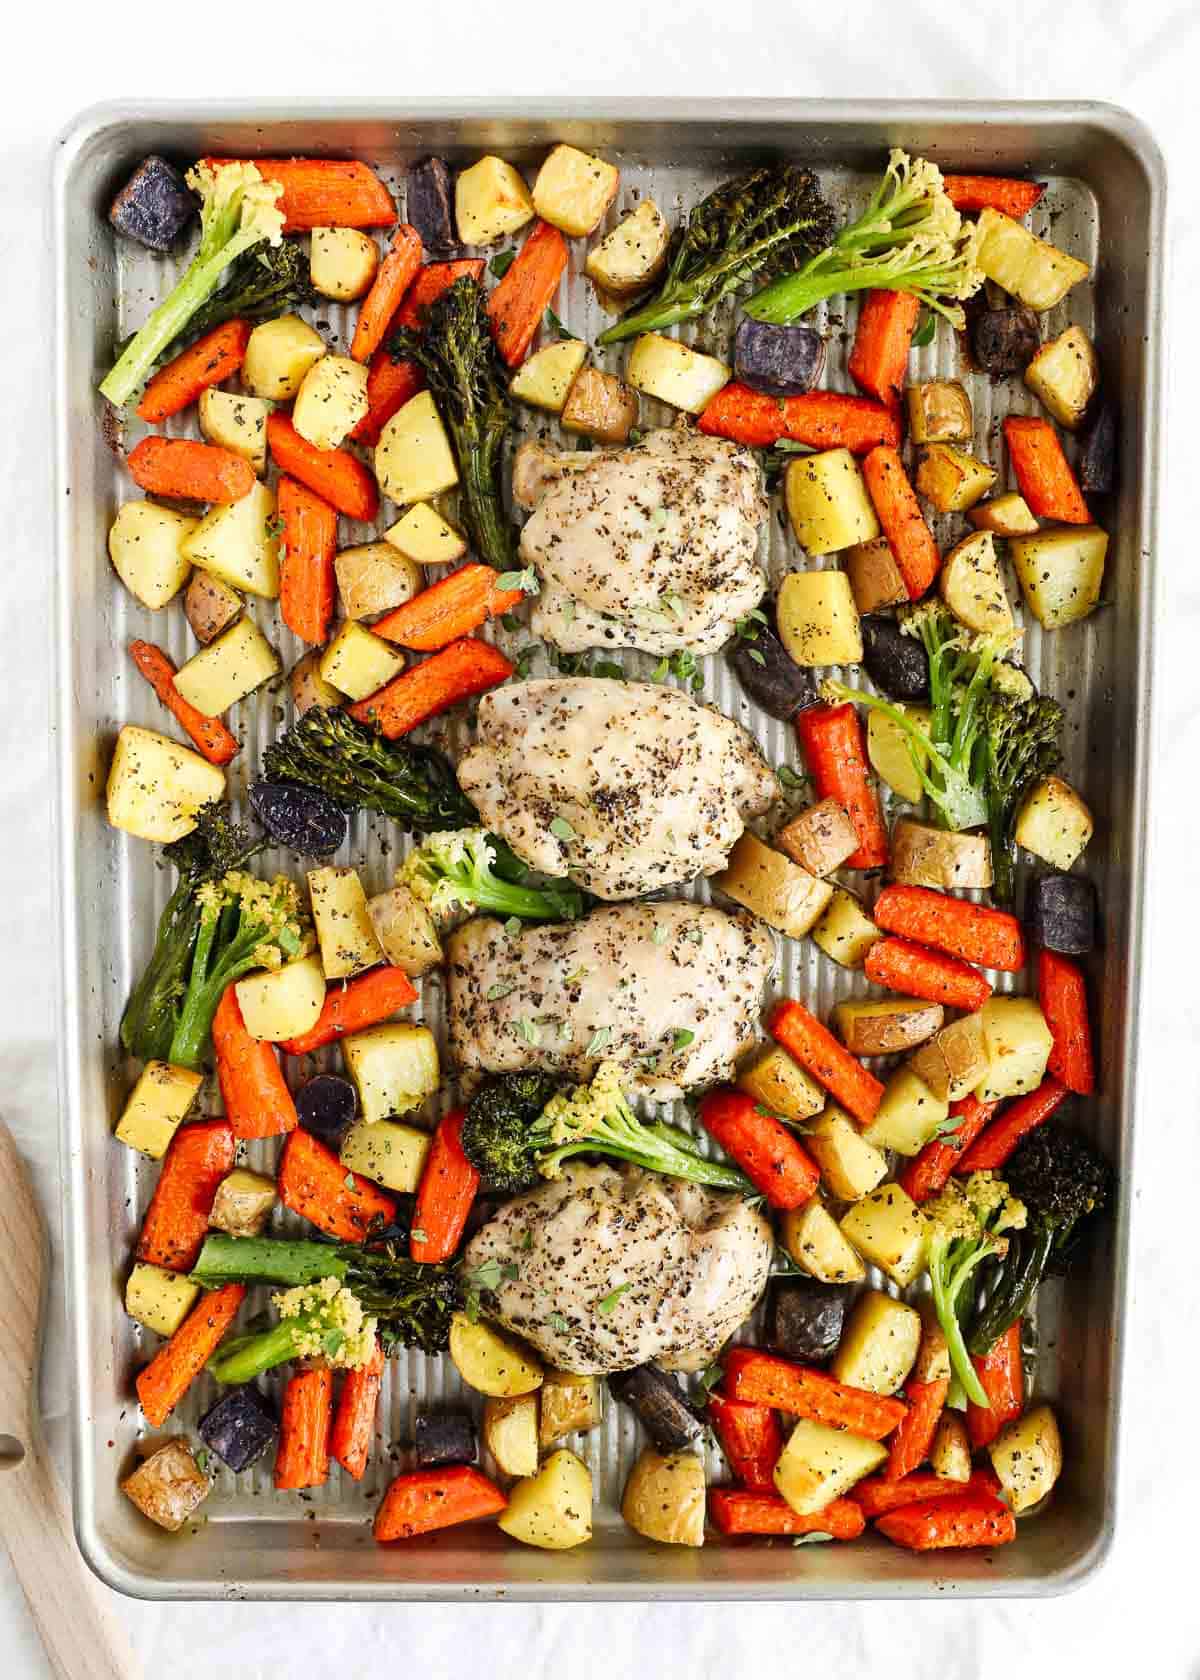 Chicken and vegetables on sheet pan.